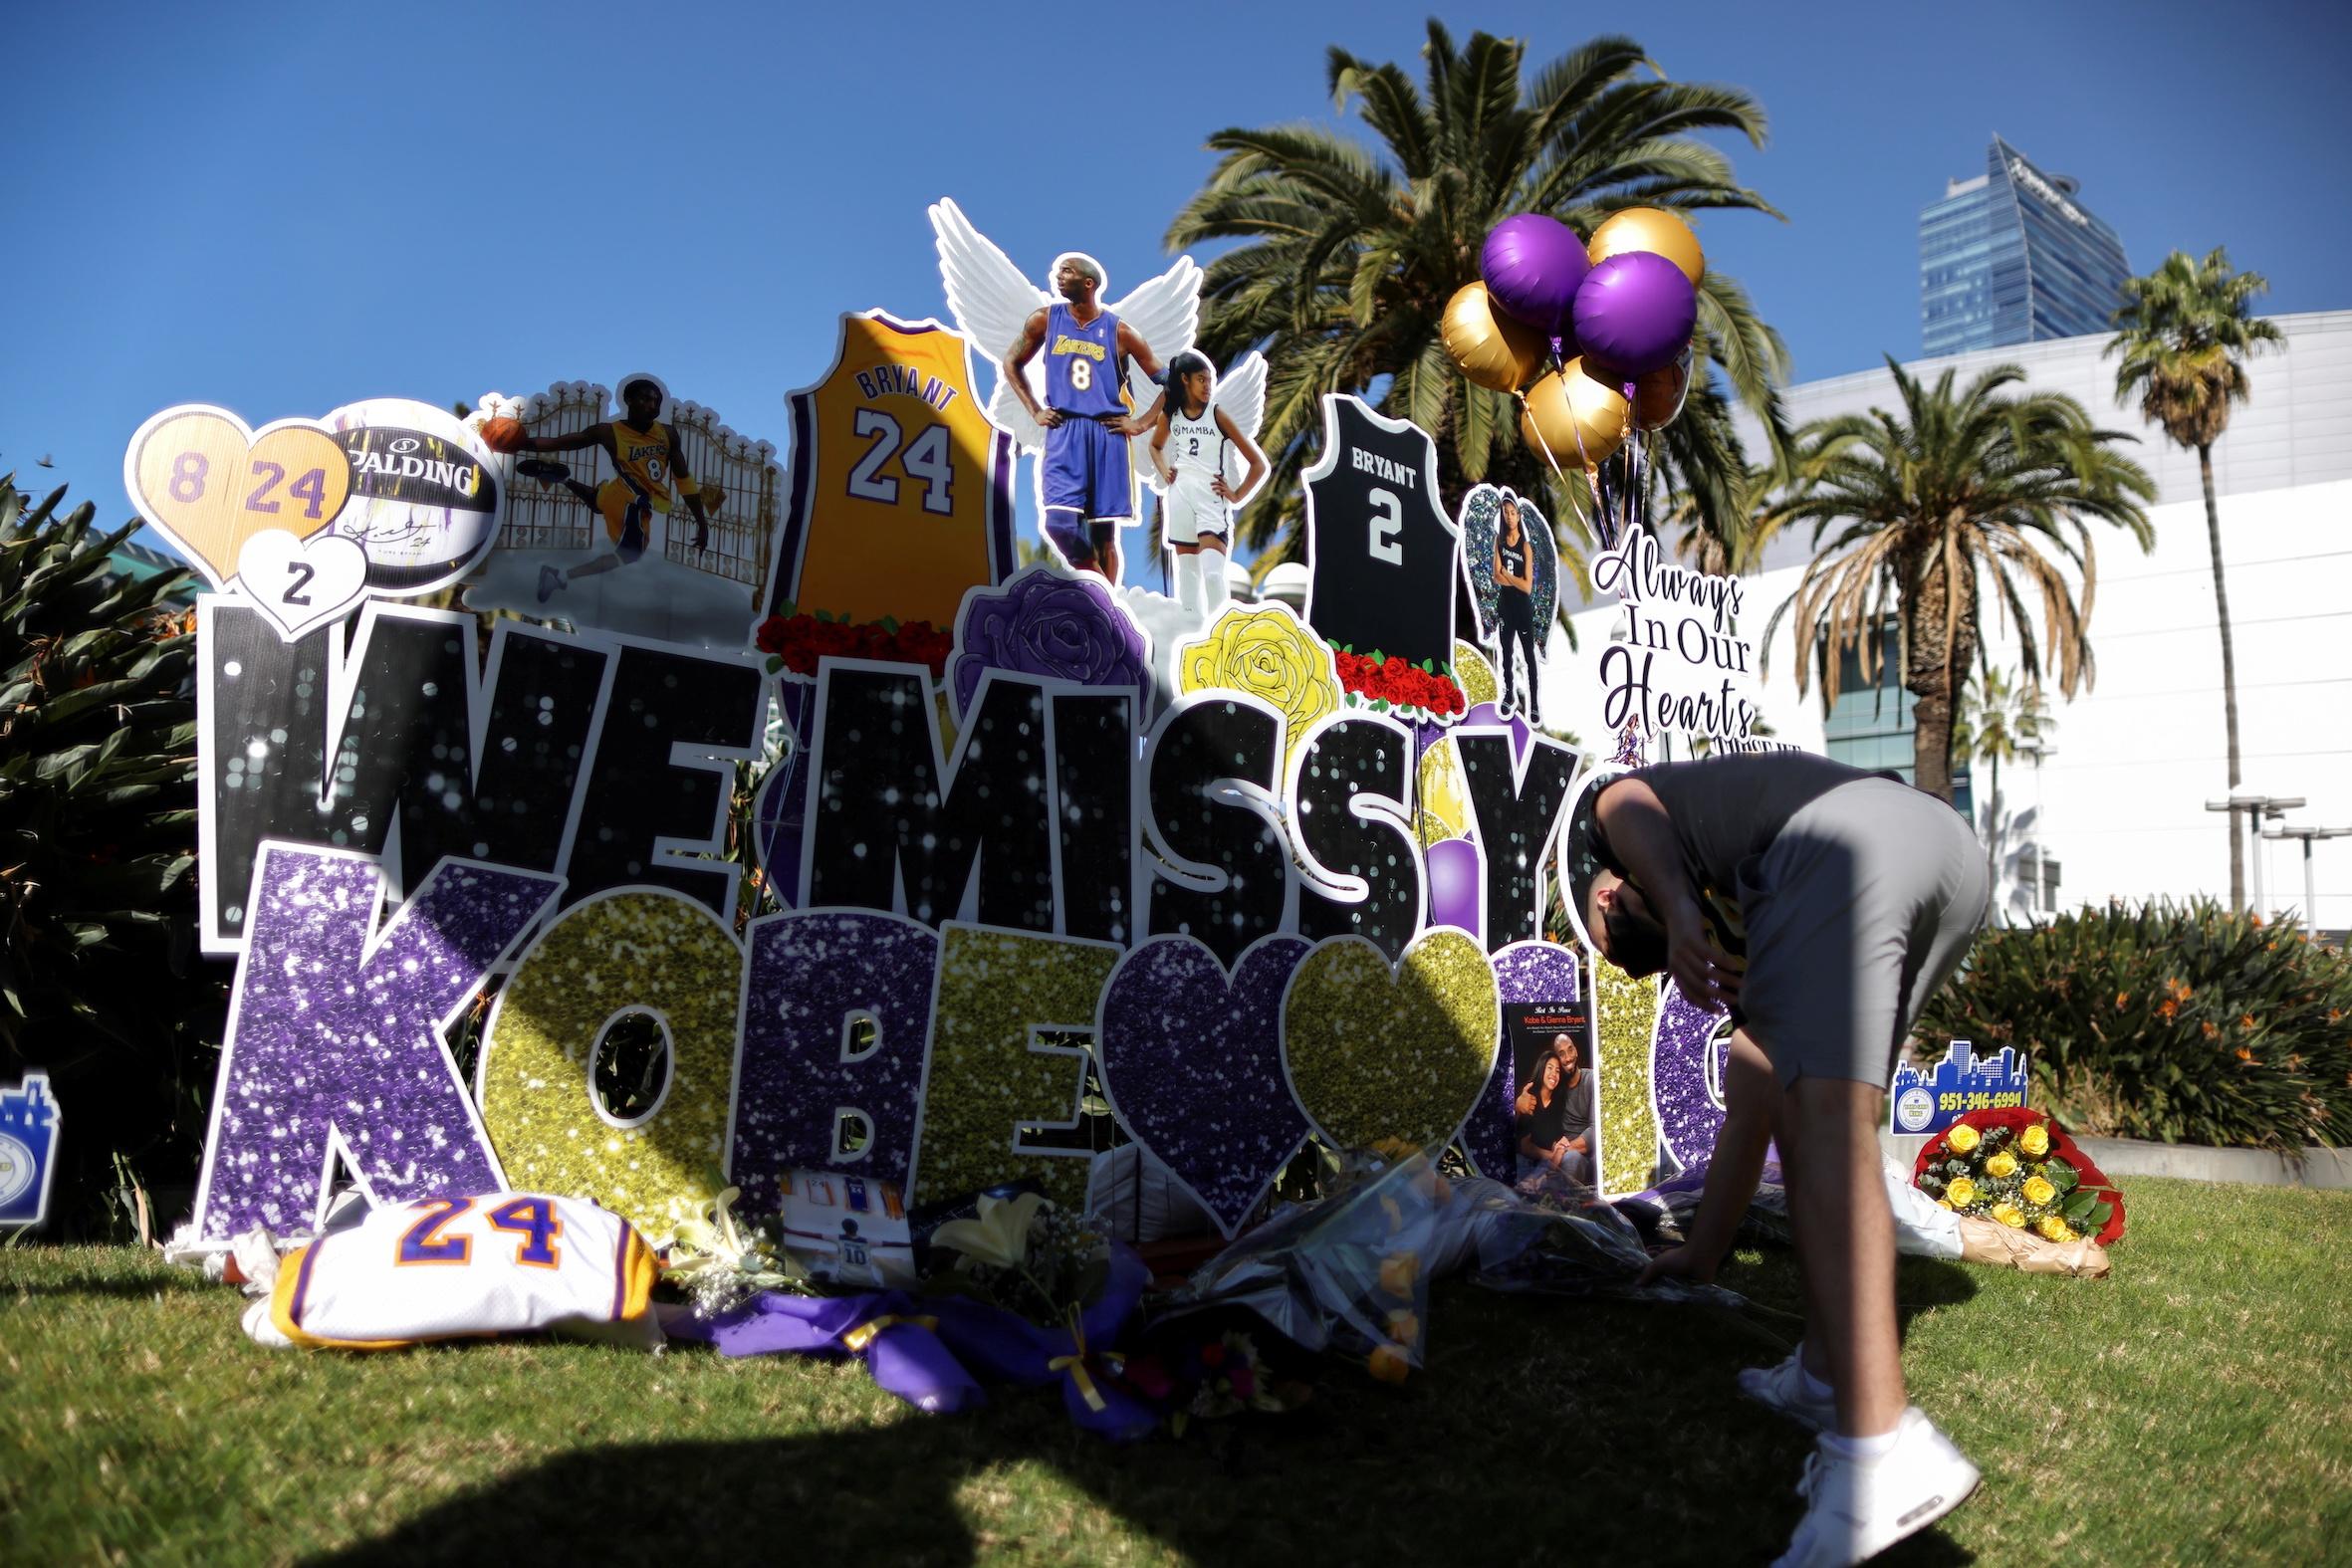 Los Angeles mourns on first anniversary of Kobe Bryant's death